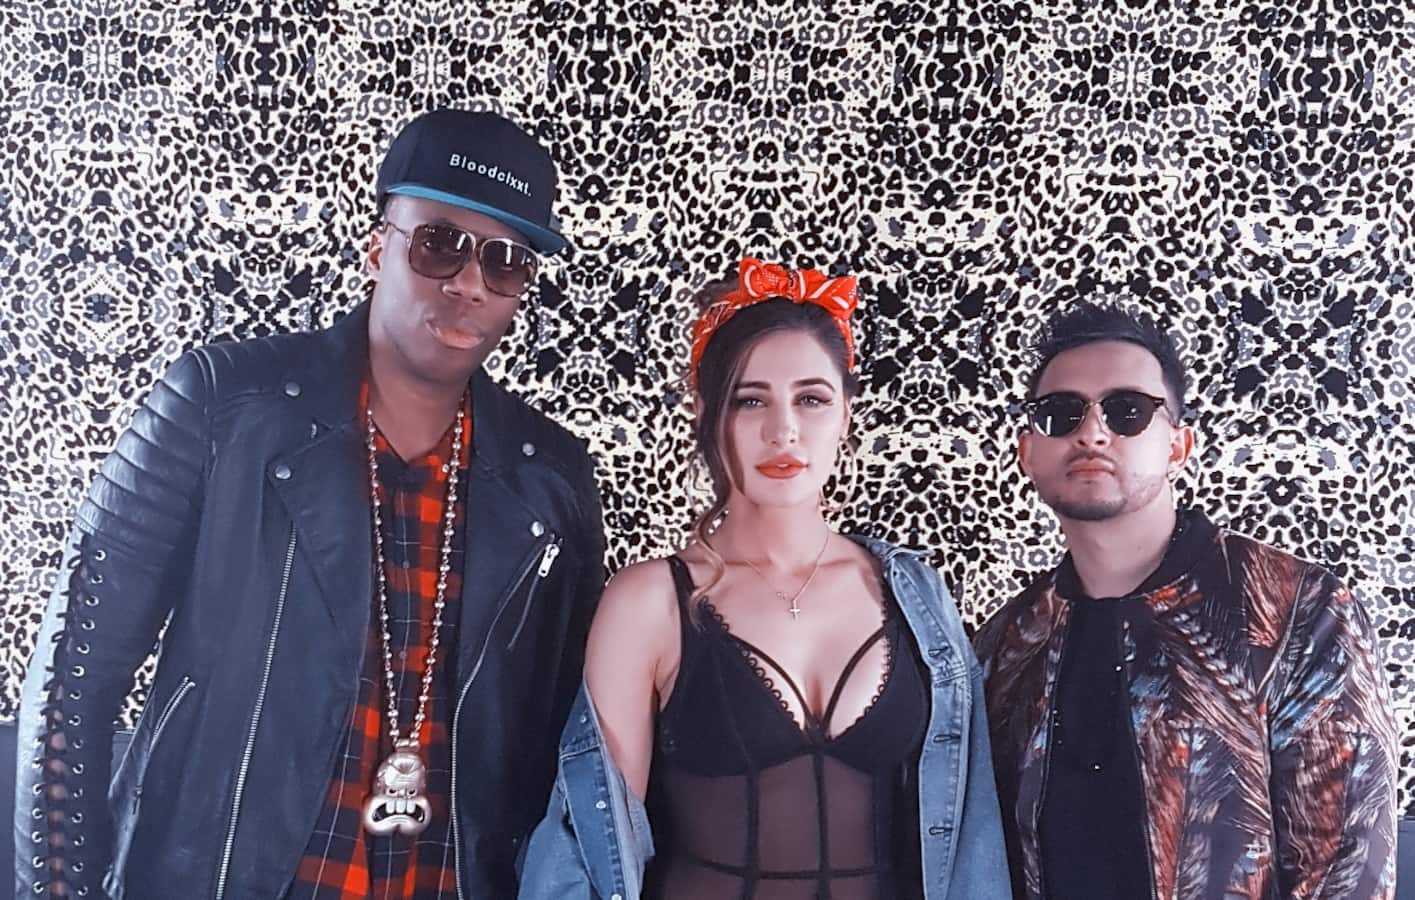 Nargis Fakhri collaborates with Canadian musician Kardinal Offishall for her singing debut